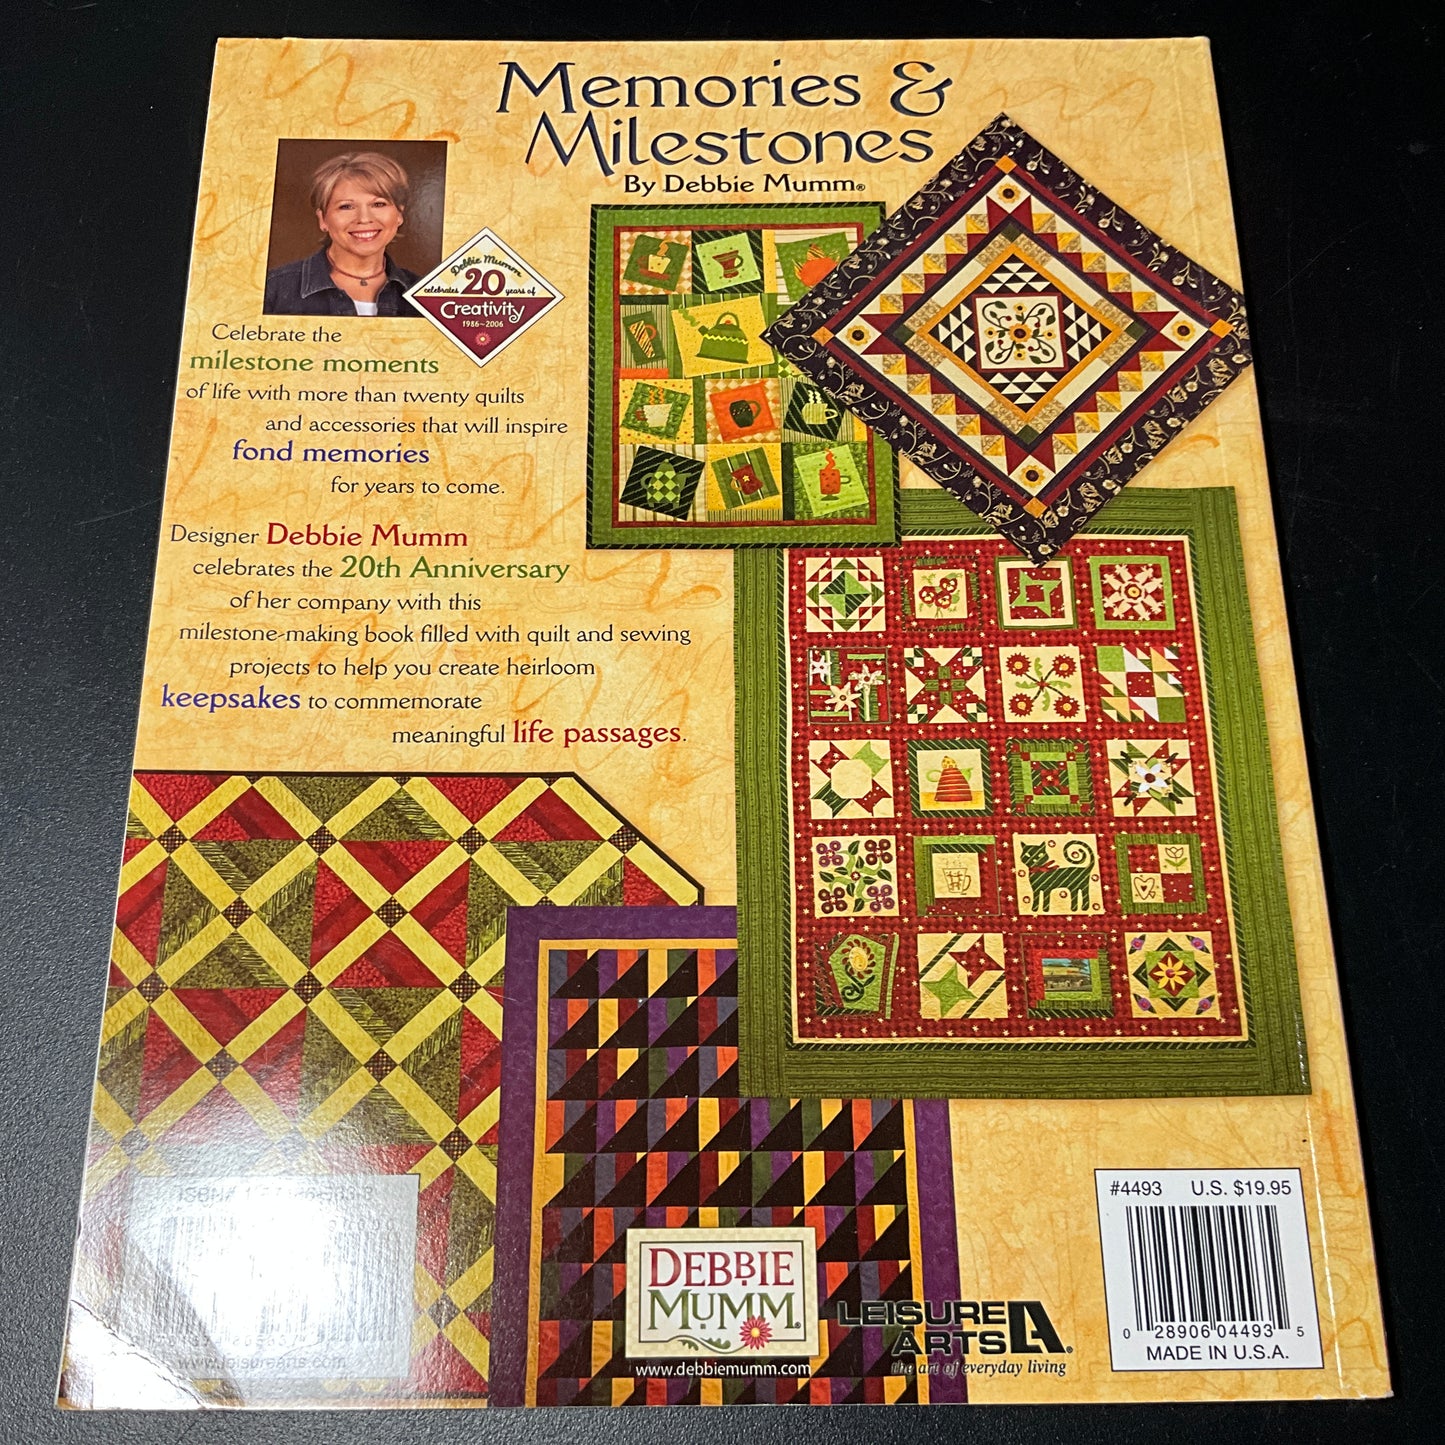 Debbie Mumm choice vintage quilt project books see pictures and variations*